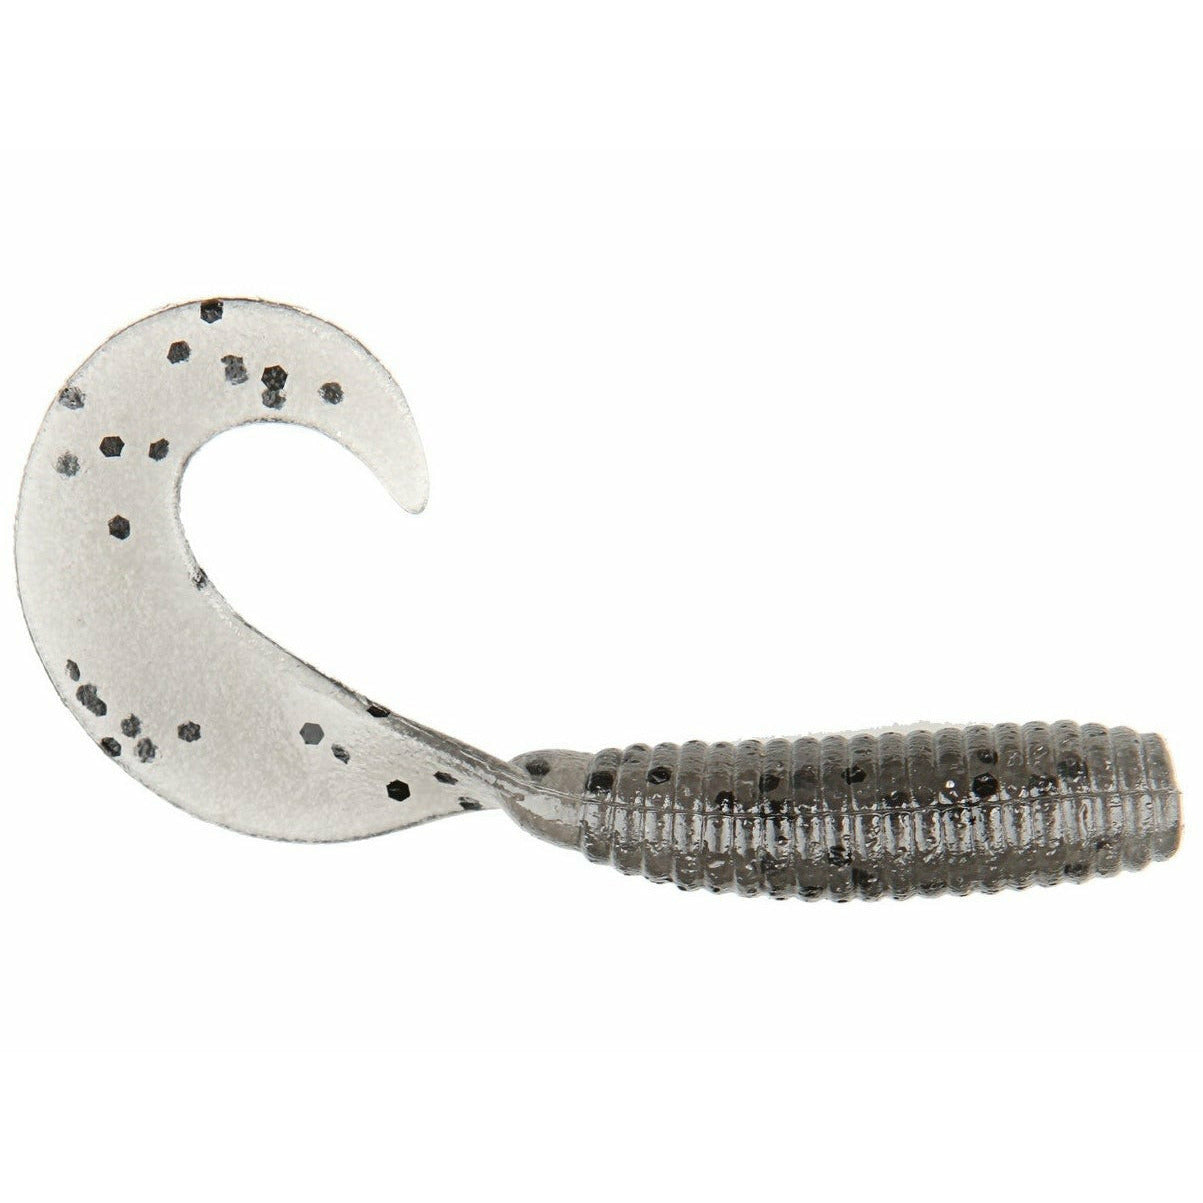 YAMAMOTO SINGLE TAIL GRUBS - Copperstate Tackle